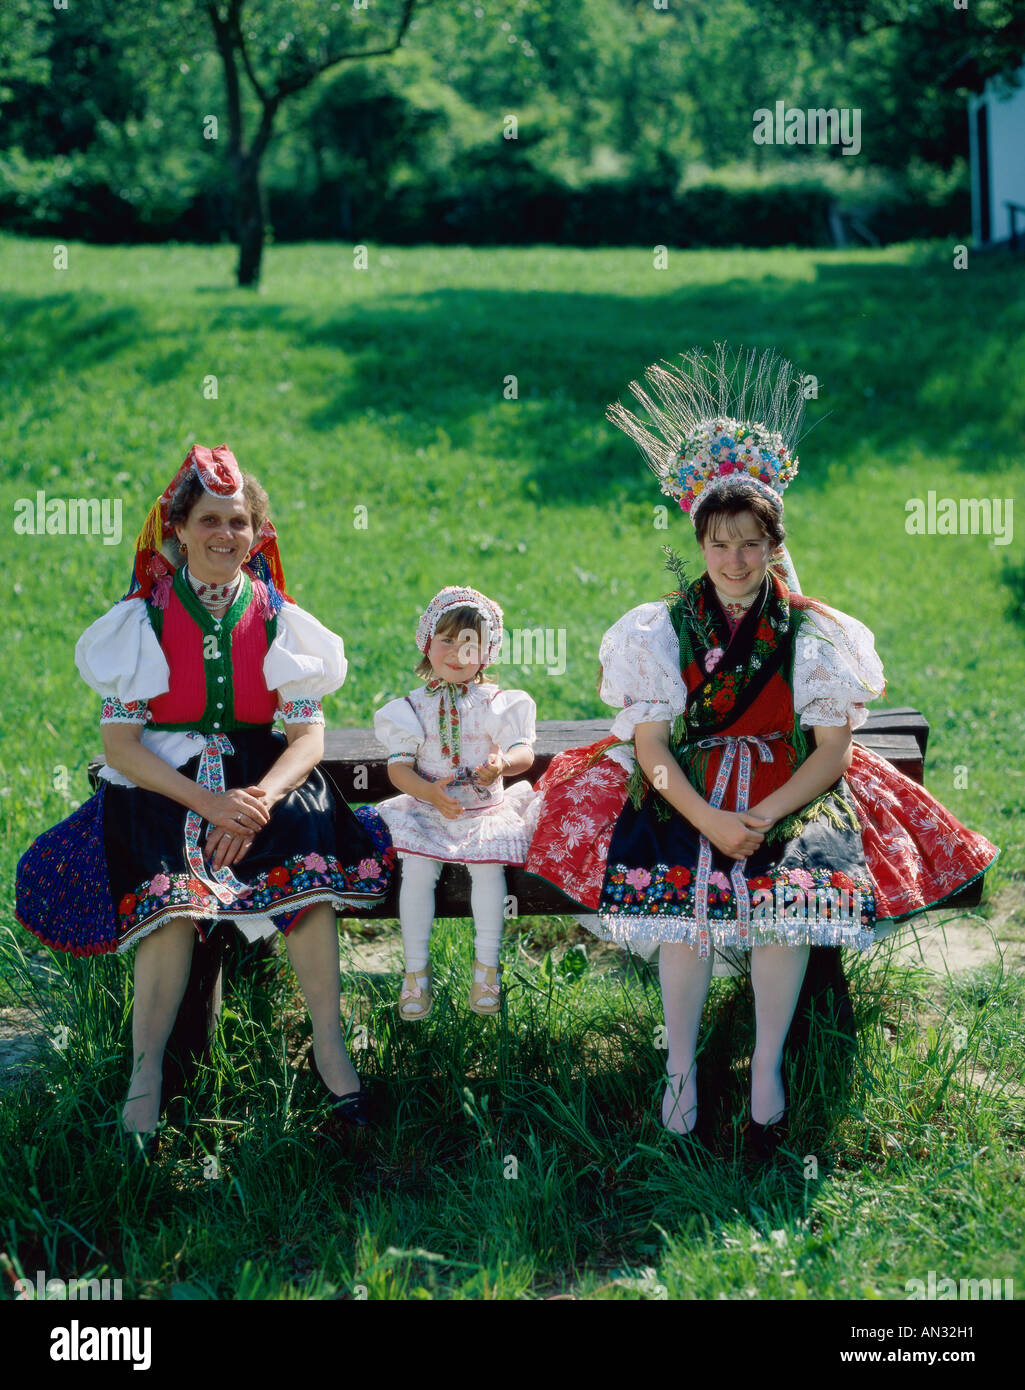 Traditional Folklore Costume, Hungary Stock Photo